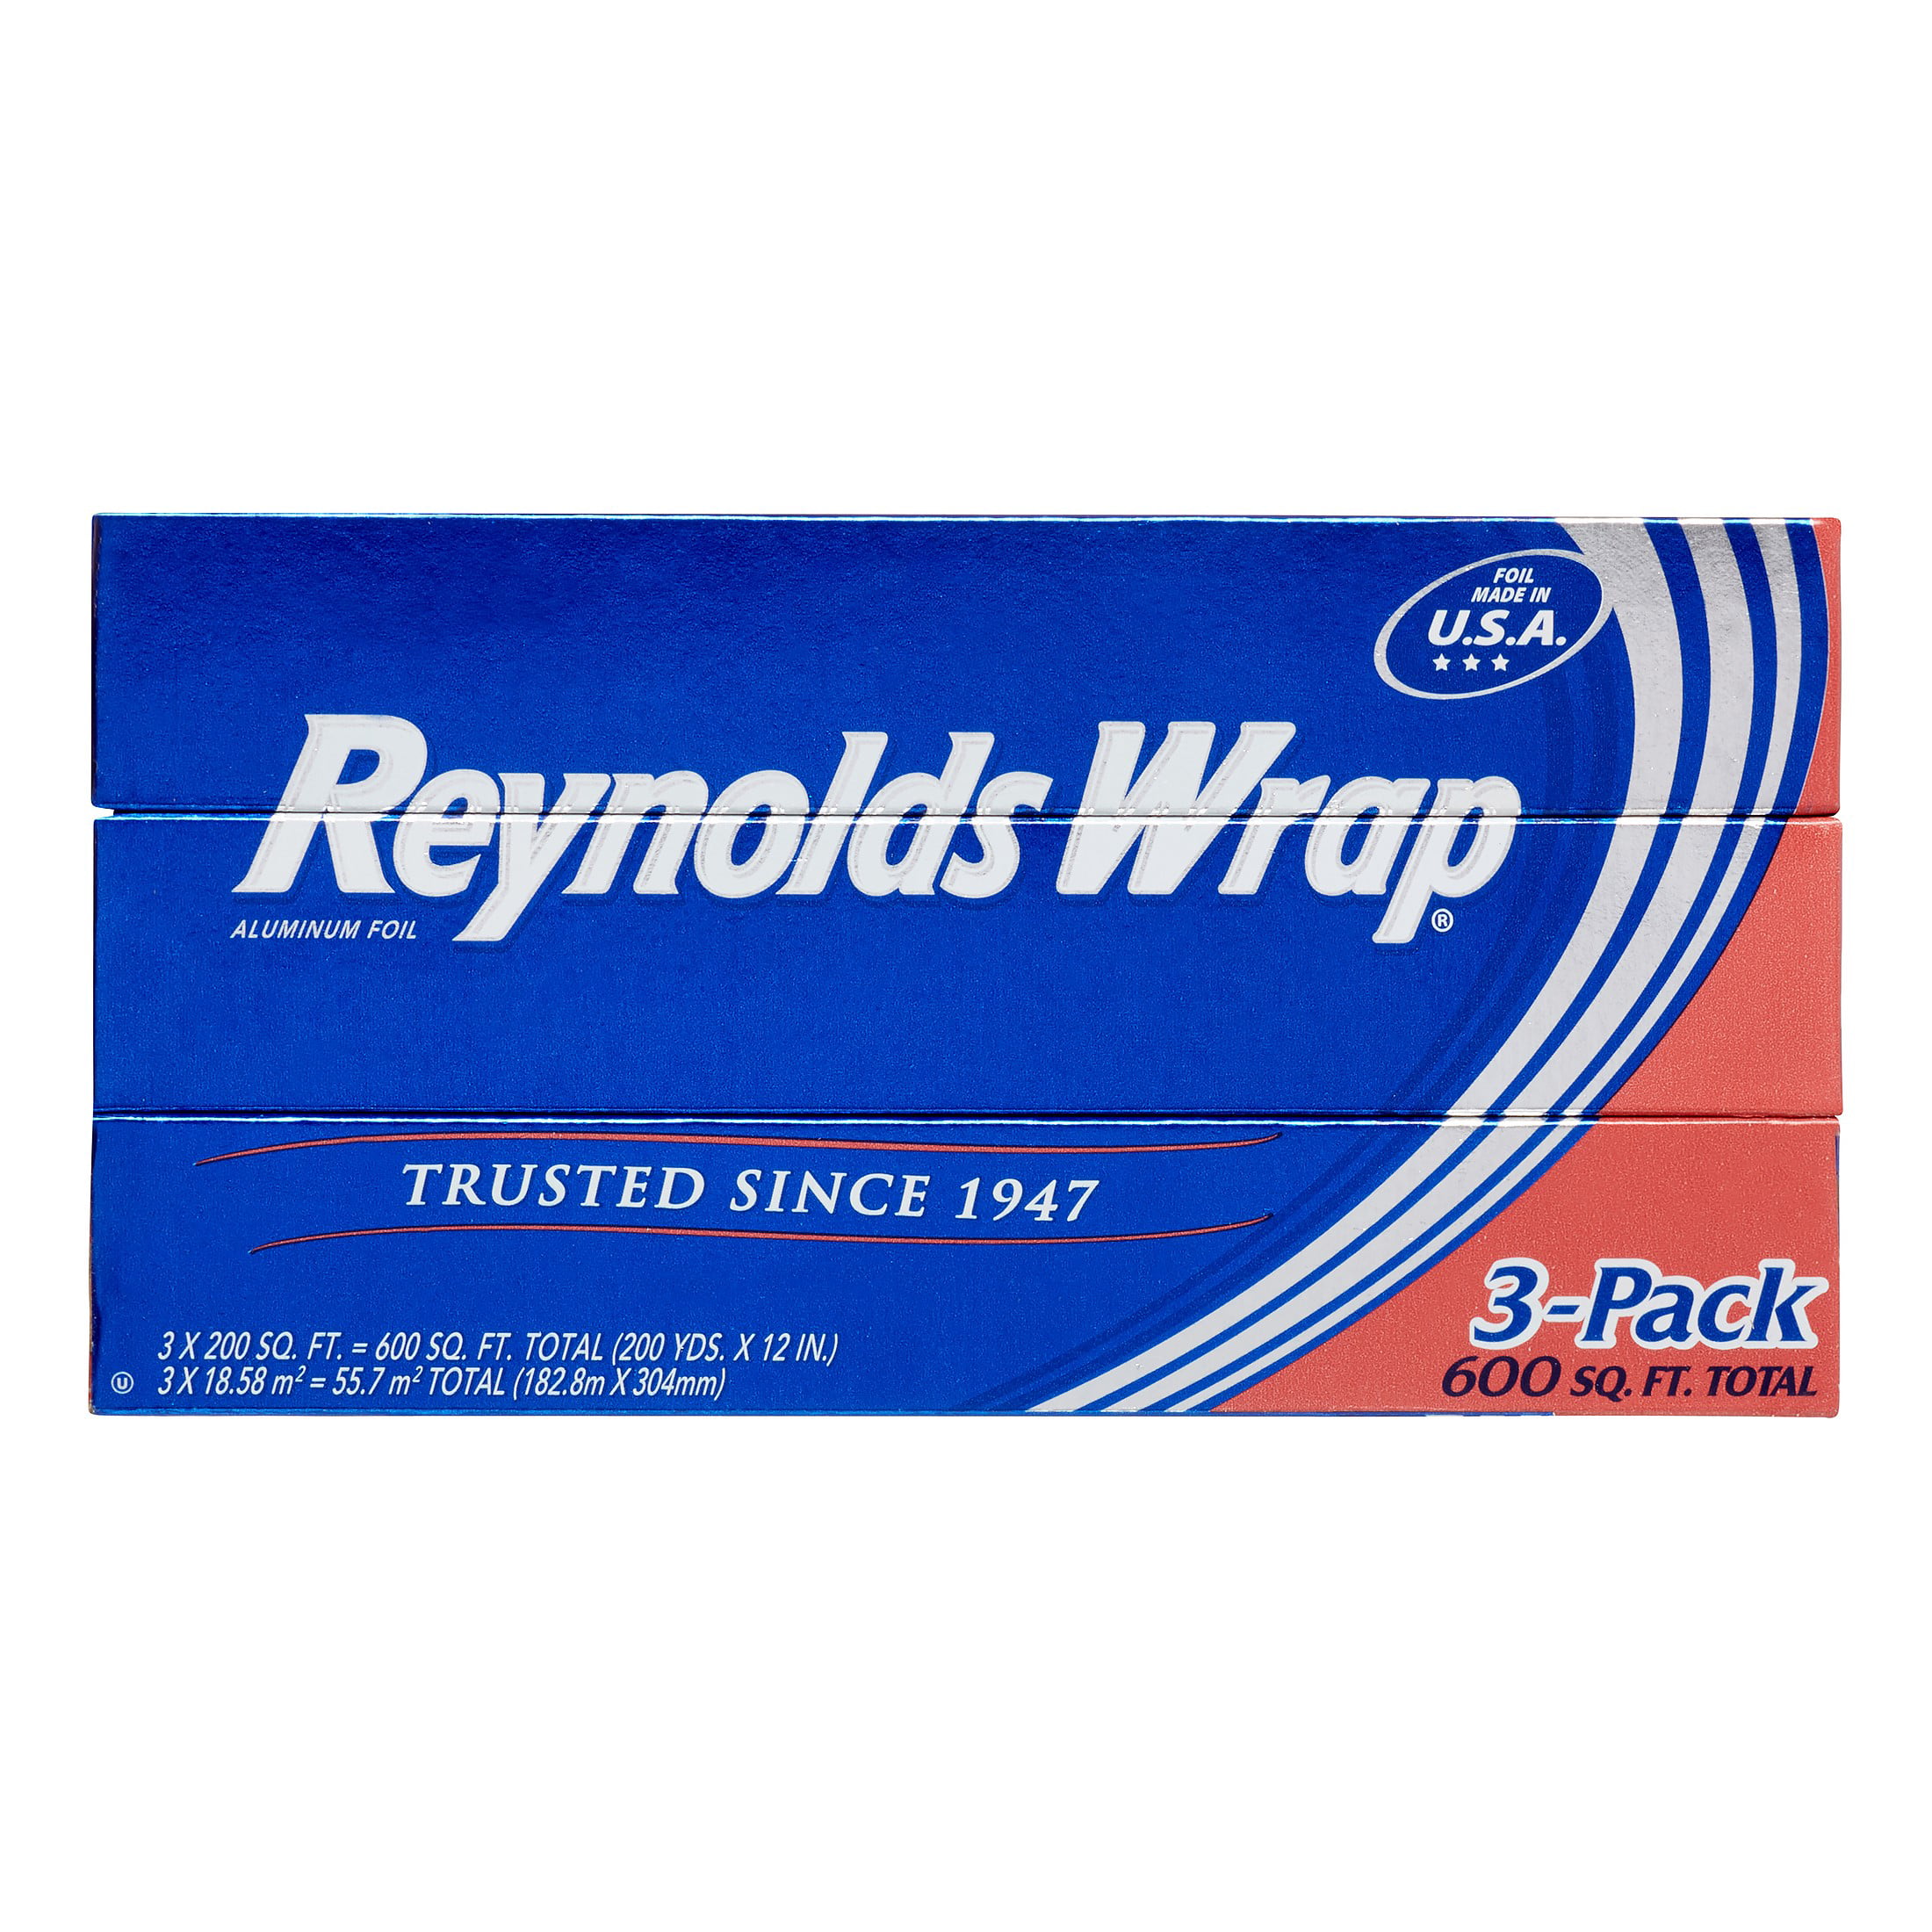 Reynolds Wrap foil class action claims product falsely advertised